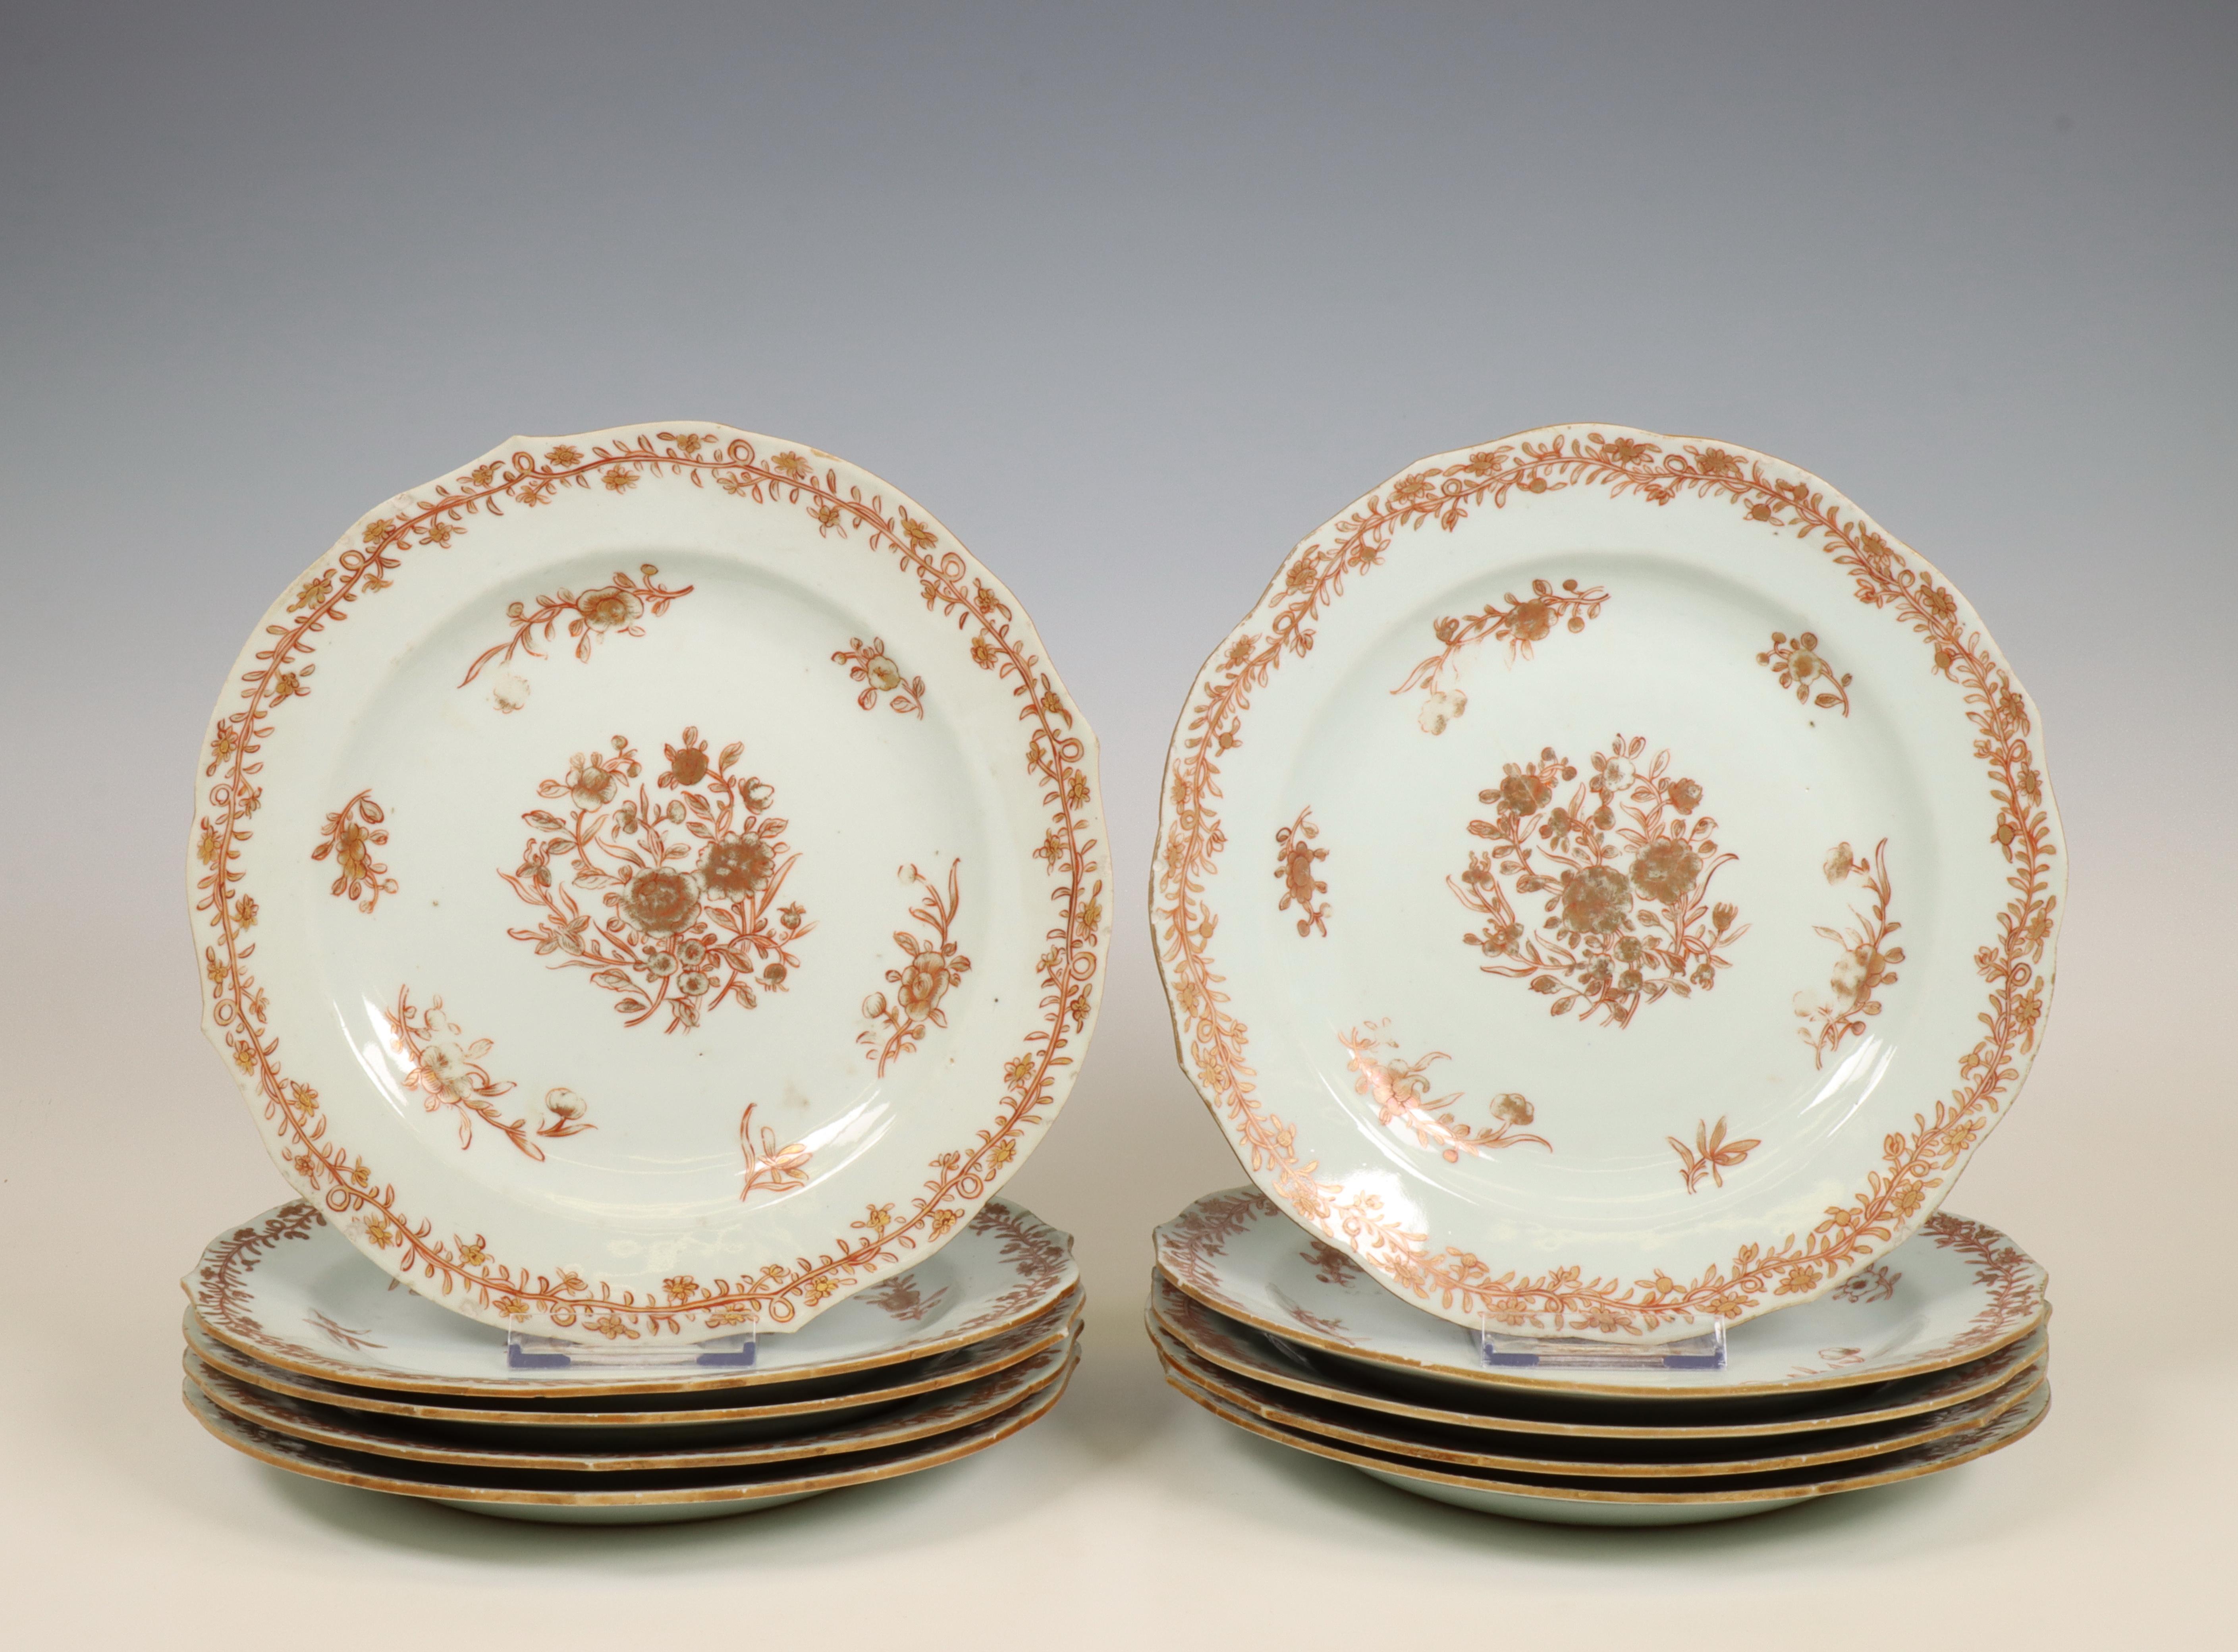 China, a set of ten iron-red and gilt porcelain plates, 18th century,